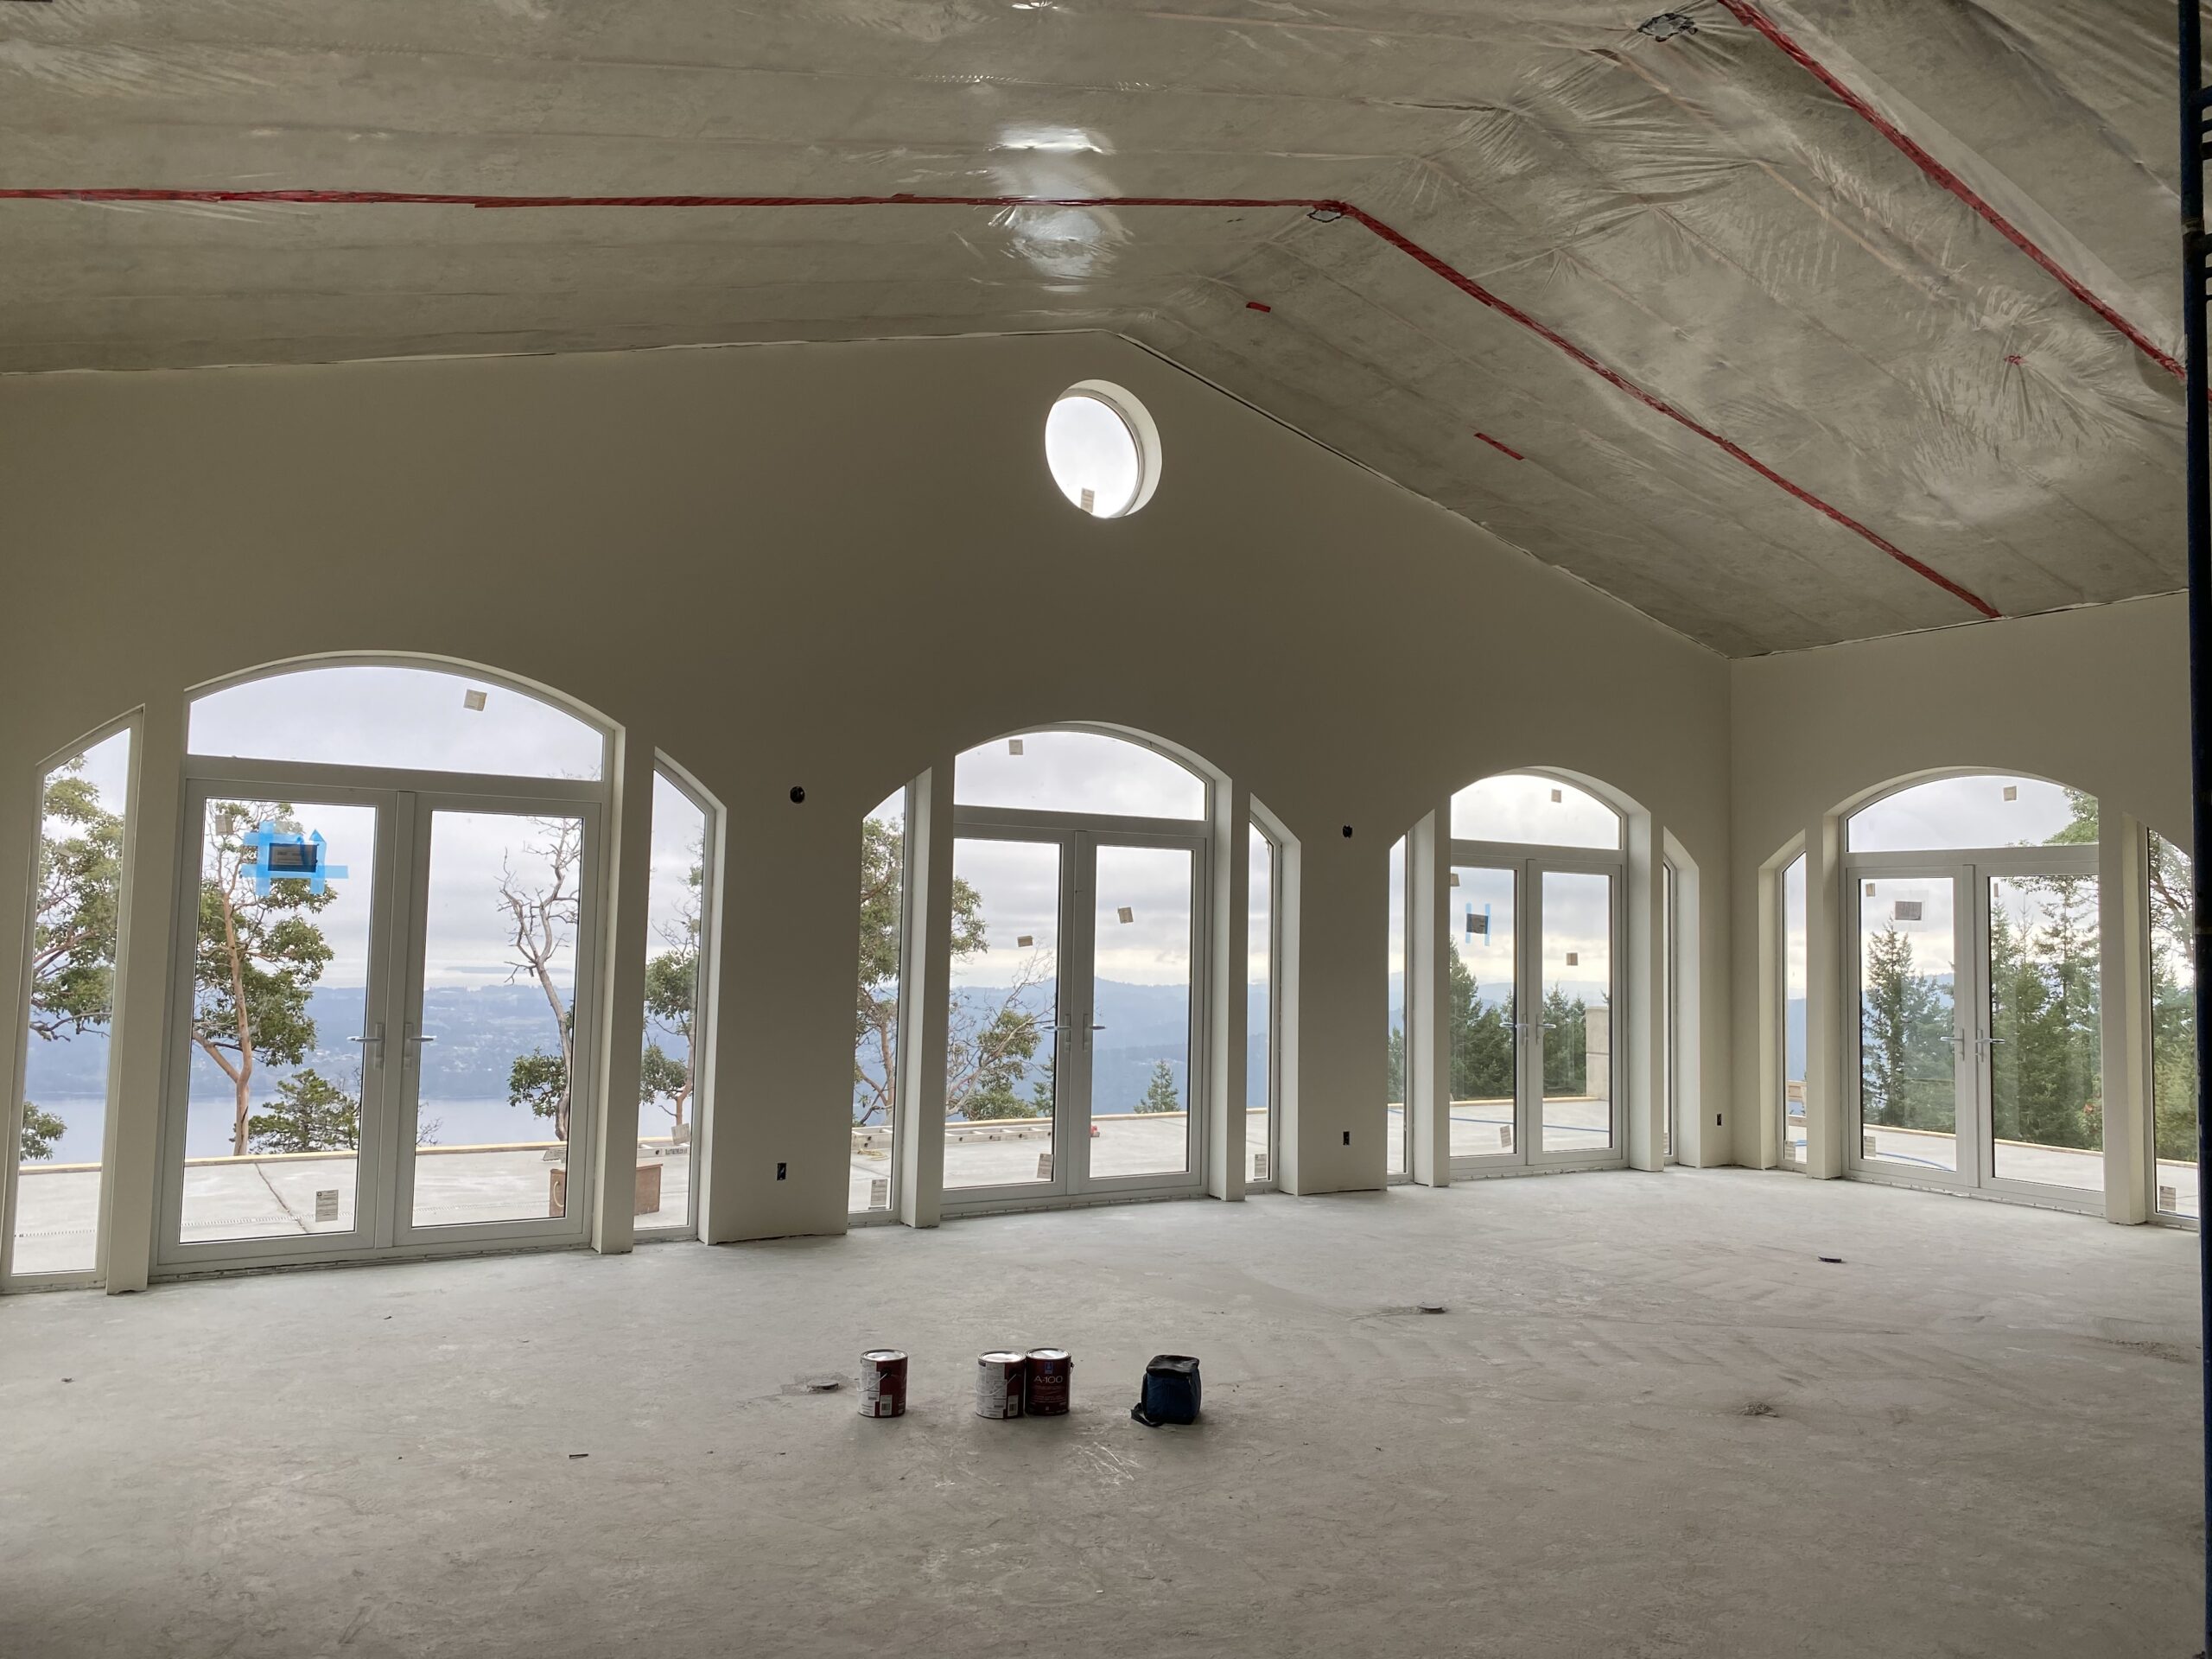 Chalet-style home with arched windows under construction